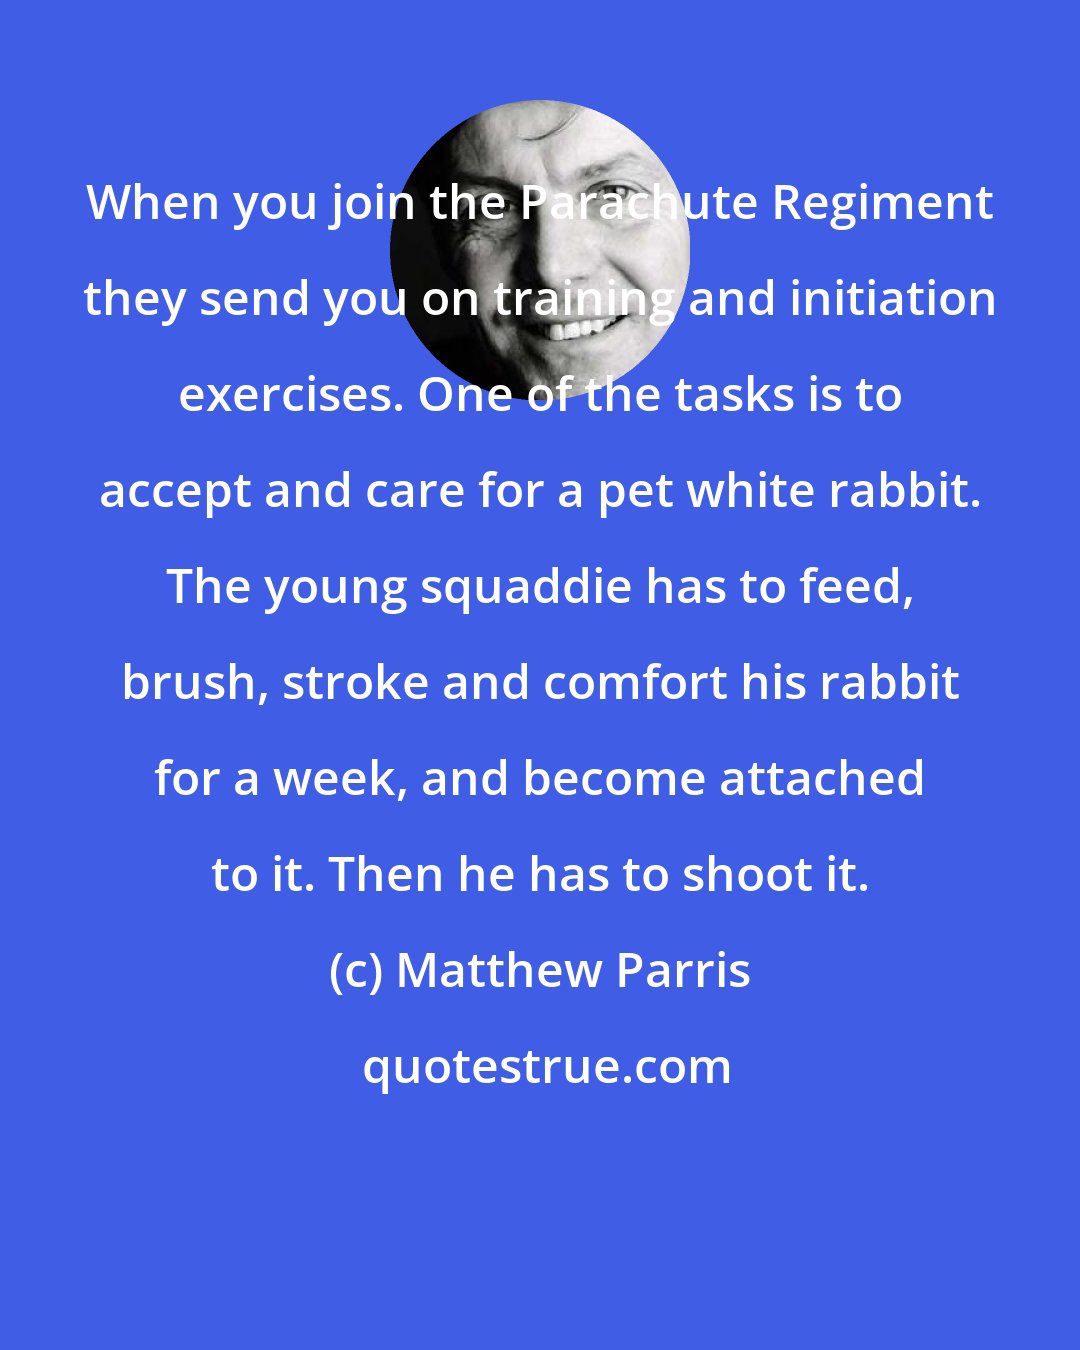 Matthew Parris: When you join the Parachute Regiment they send you on training and initiation exercises. One of the tasks is to accept and care for a pet white rabbit. The young squaddie has to feed, brush, stroke and comfort his rabbit for a week, and become attached to it. Then he has to shoot it.